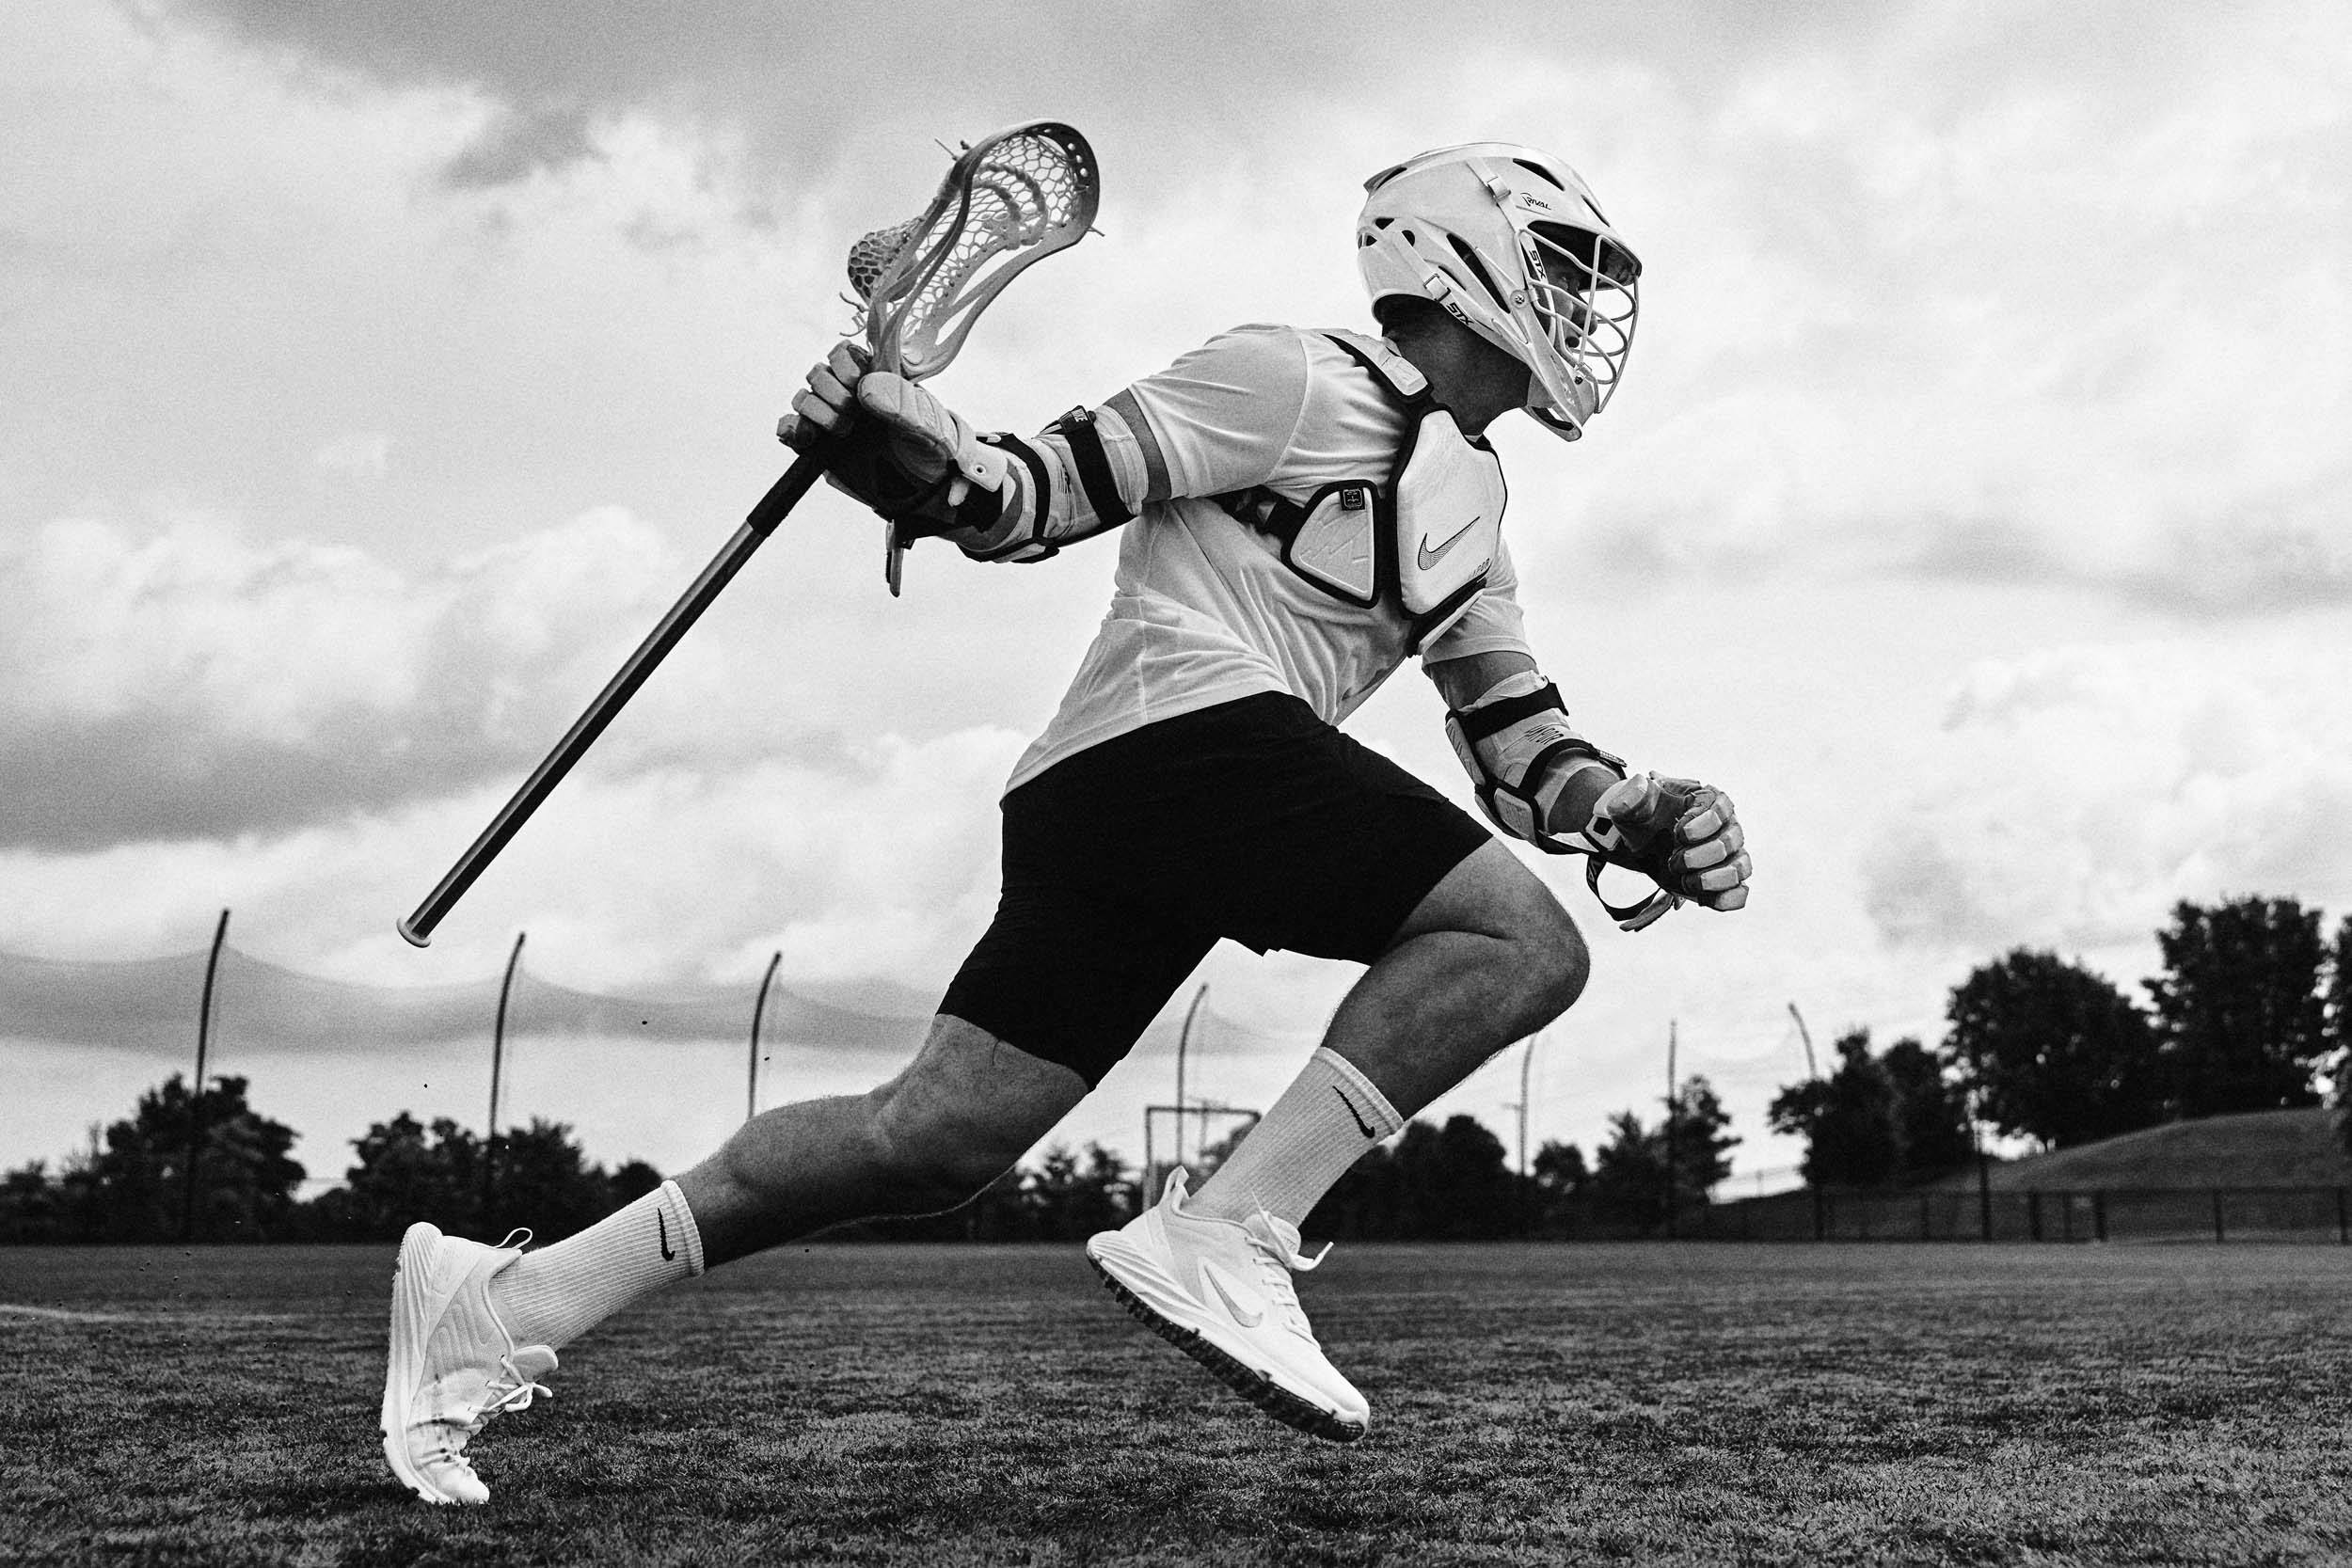 NIKE COMMERCIAL SPORTS ADVERTISING CAMPAIGN PHOTOGRAPHER NEAR LOS ANGELES NEW YORK NIKE GLOBAL BRAND PHOTOGRAPHY FEATURING STX LACROSSE